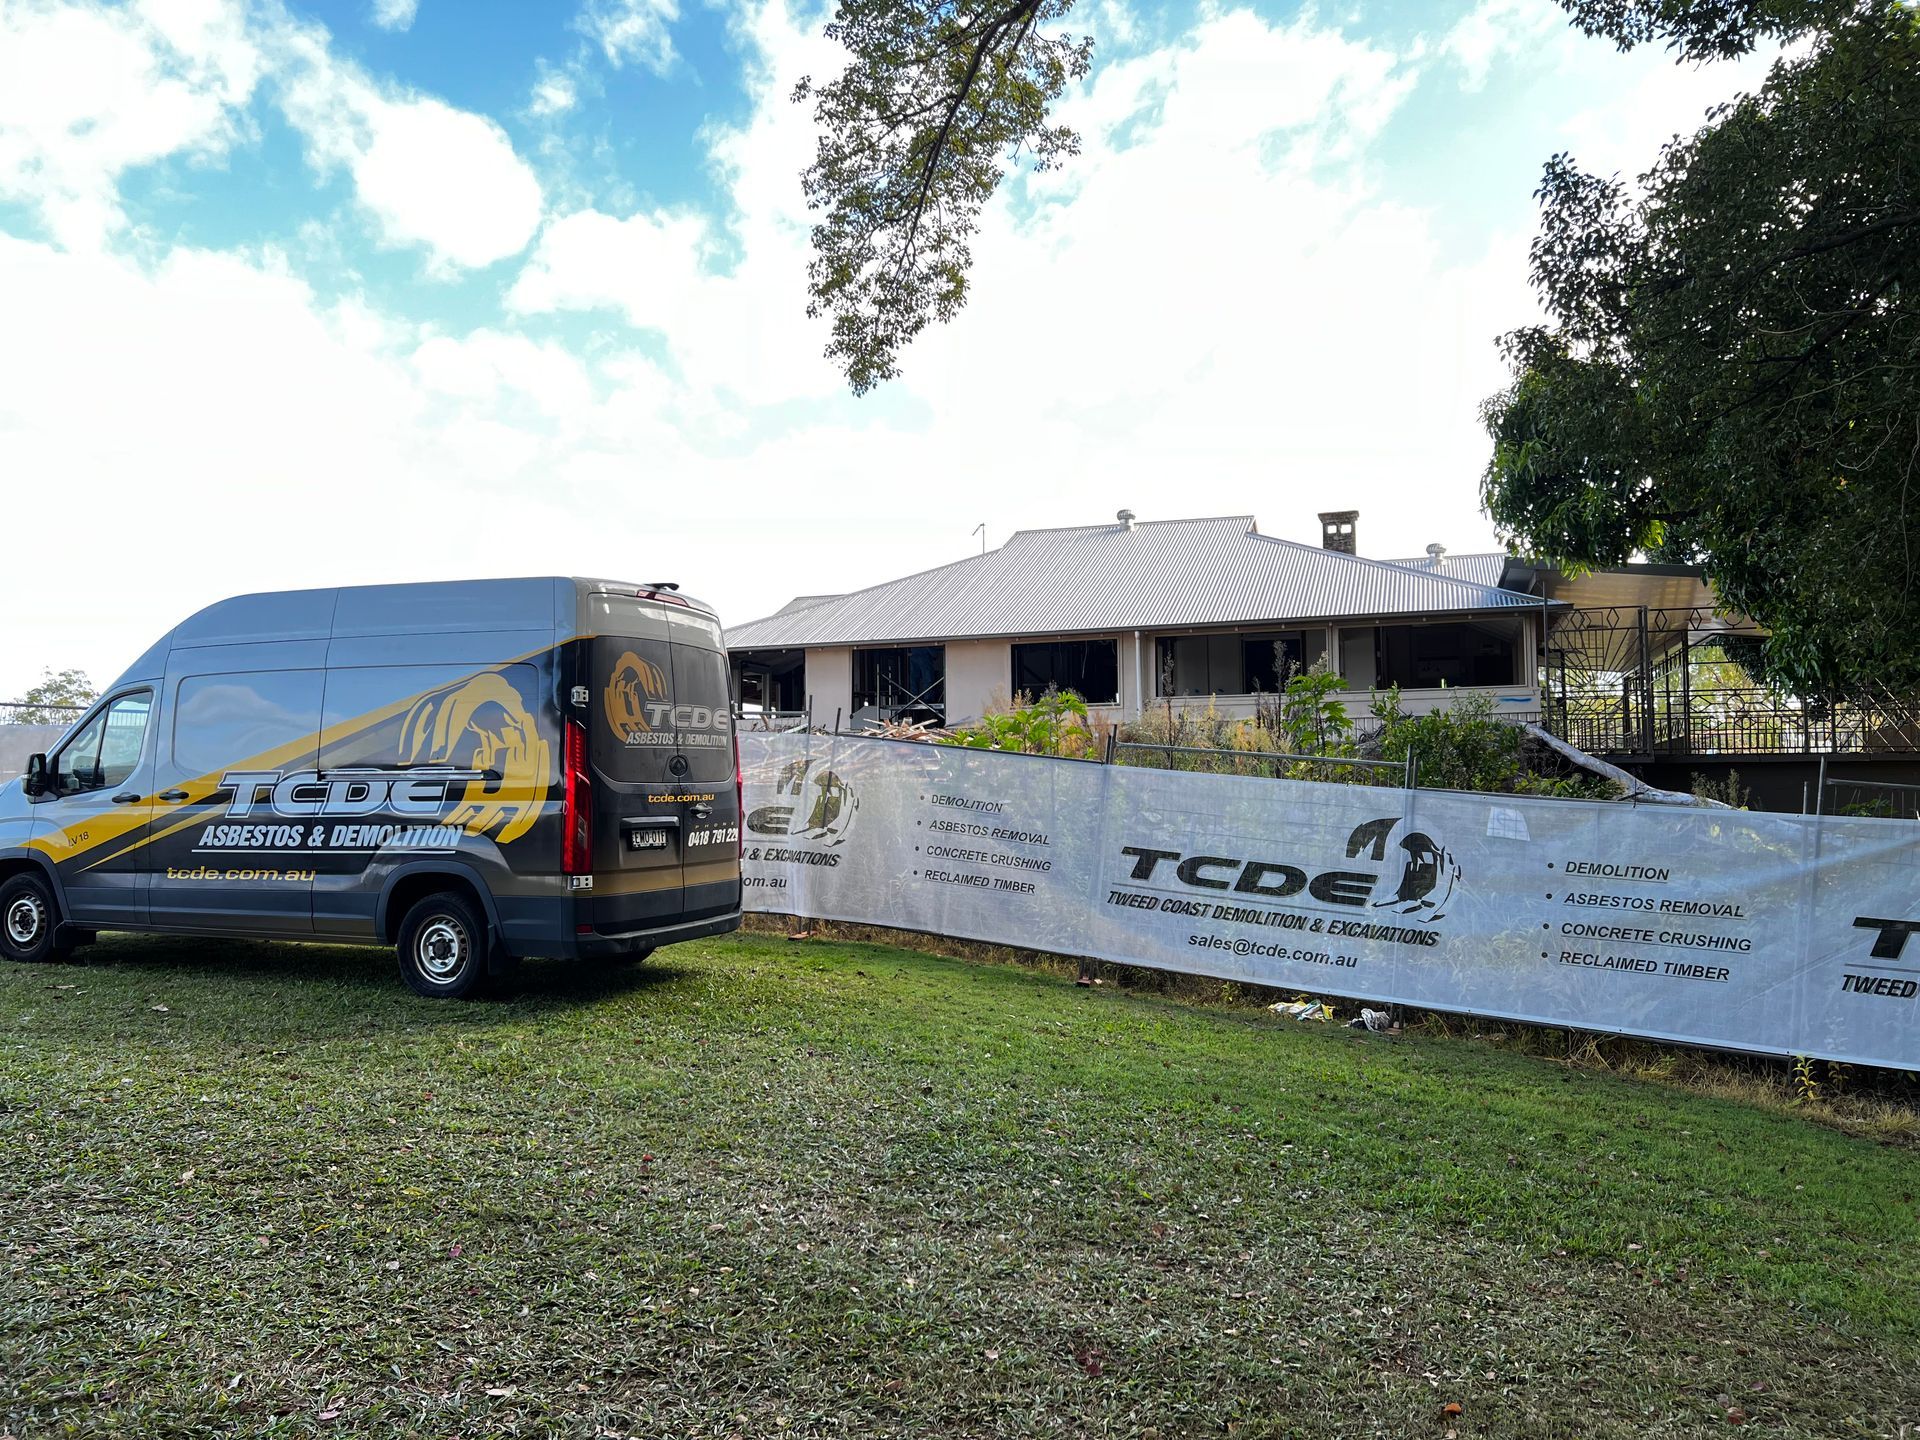 TCDE Asbestos & Demolition Work Area — Asbestos Removal And Demolition in Northern Rivers, NSW